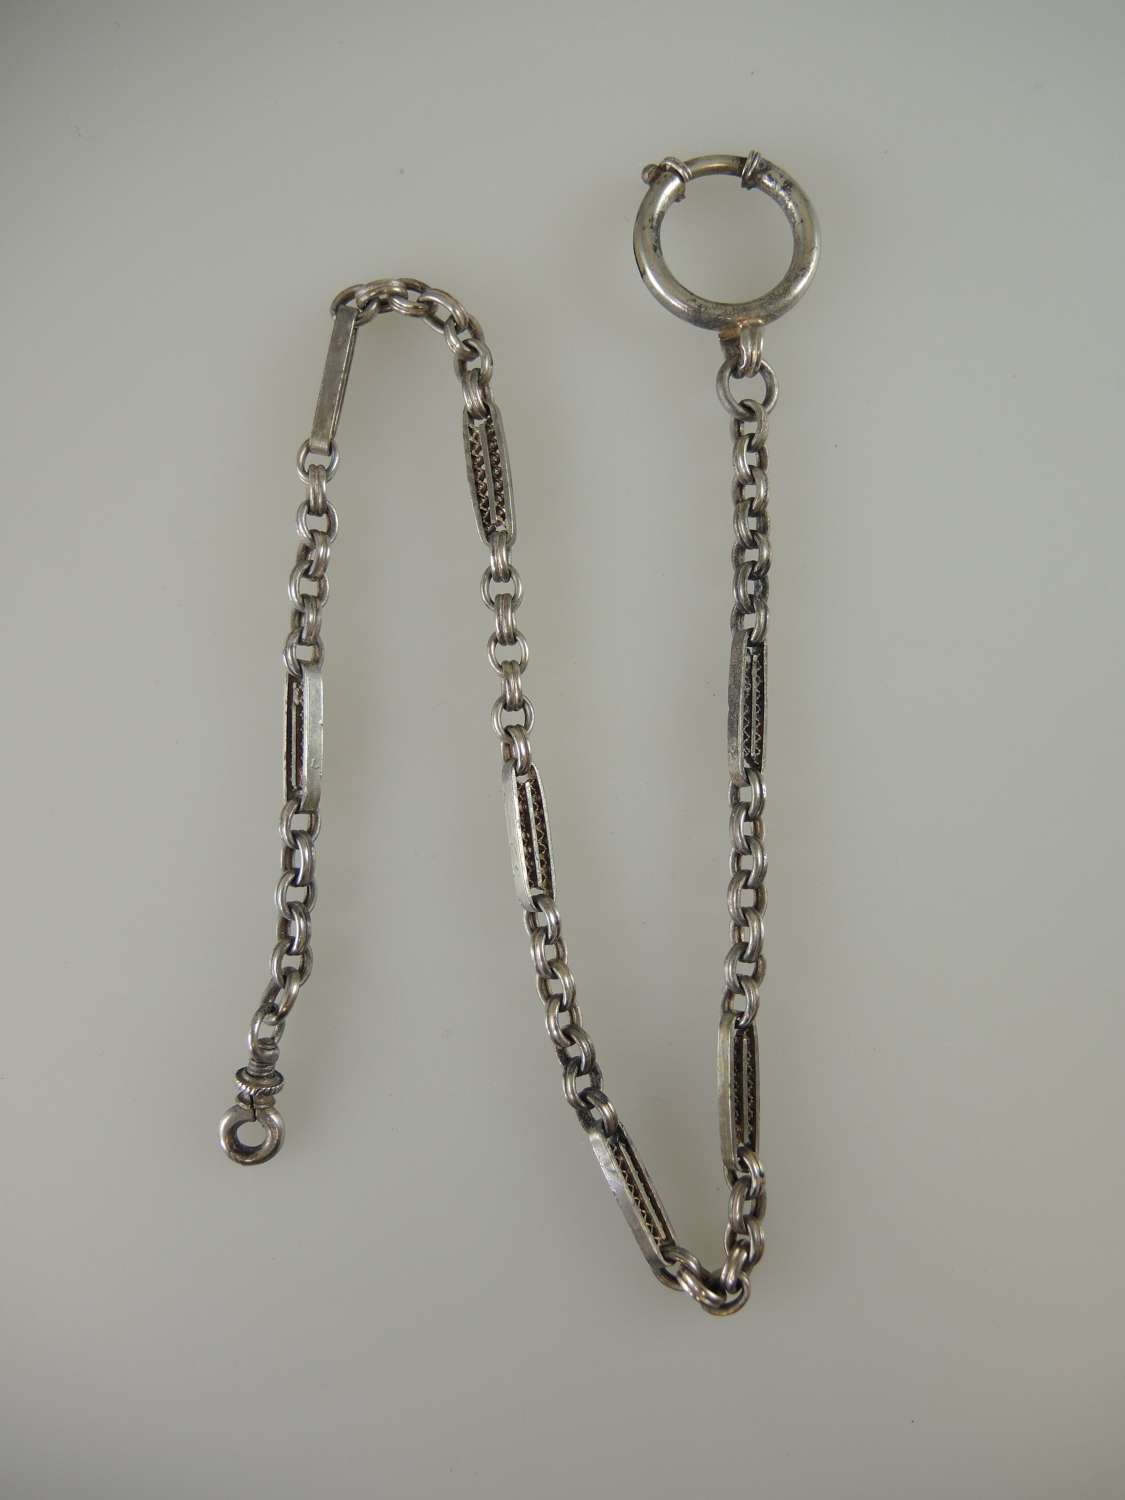 Early Victorian pocket watch chain c1850